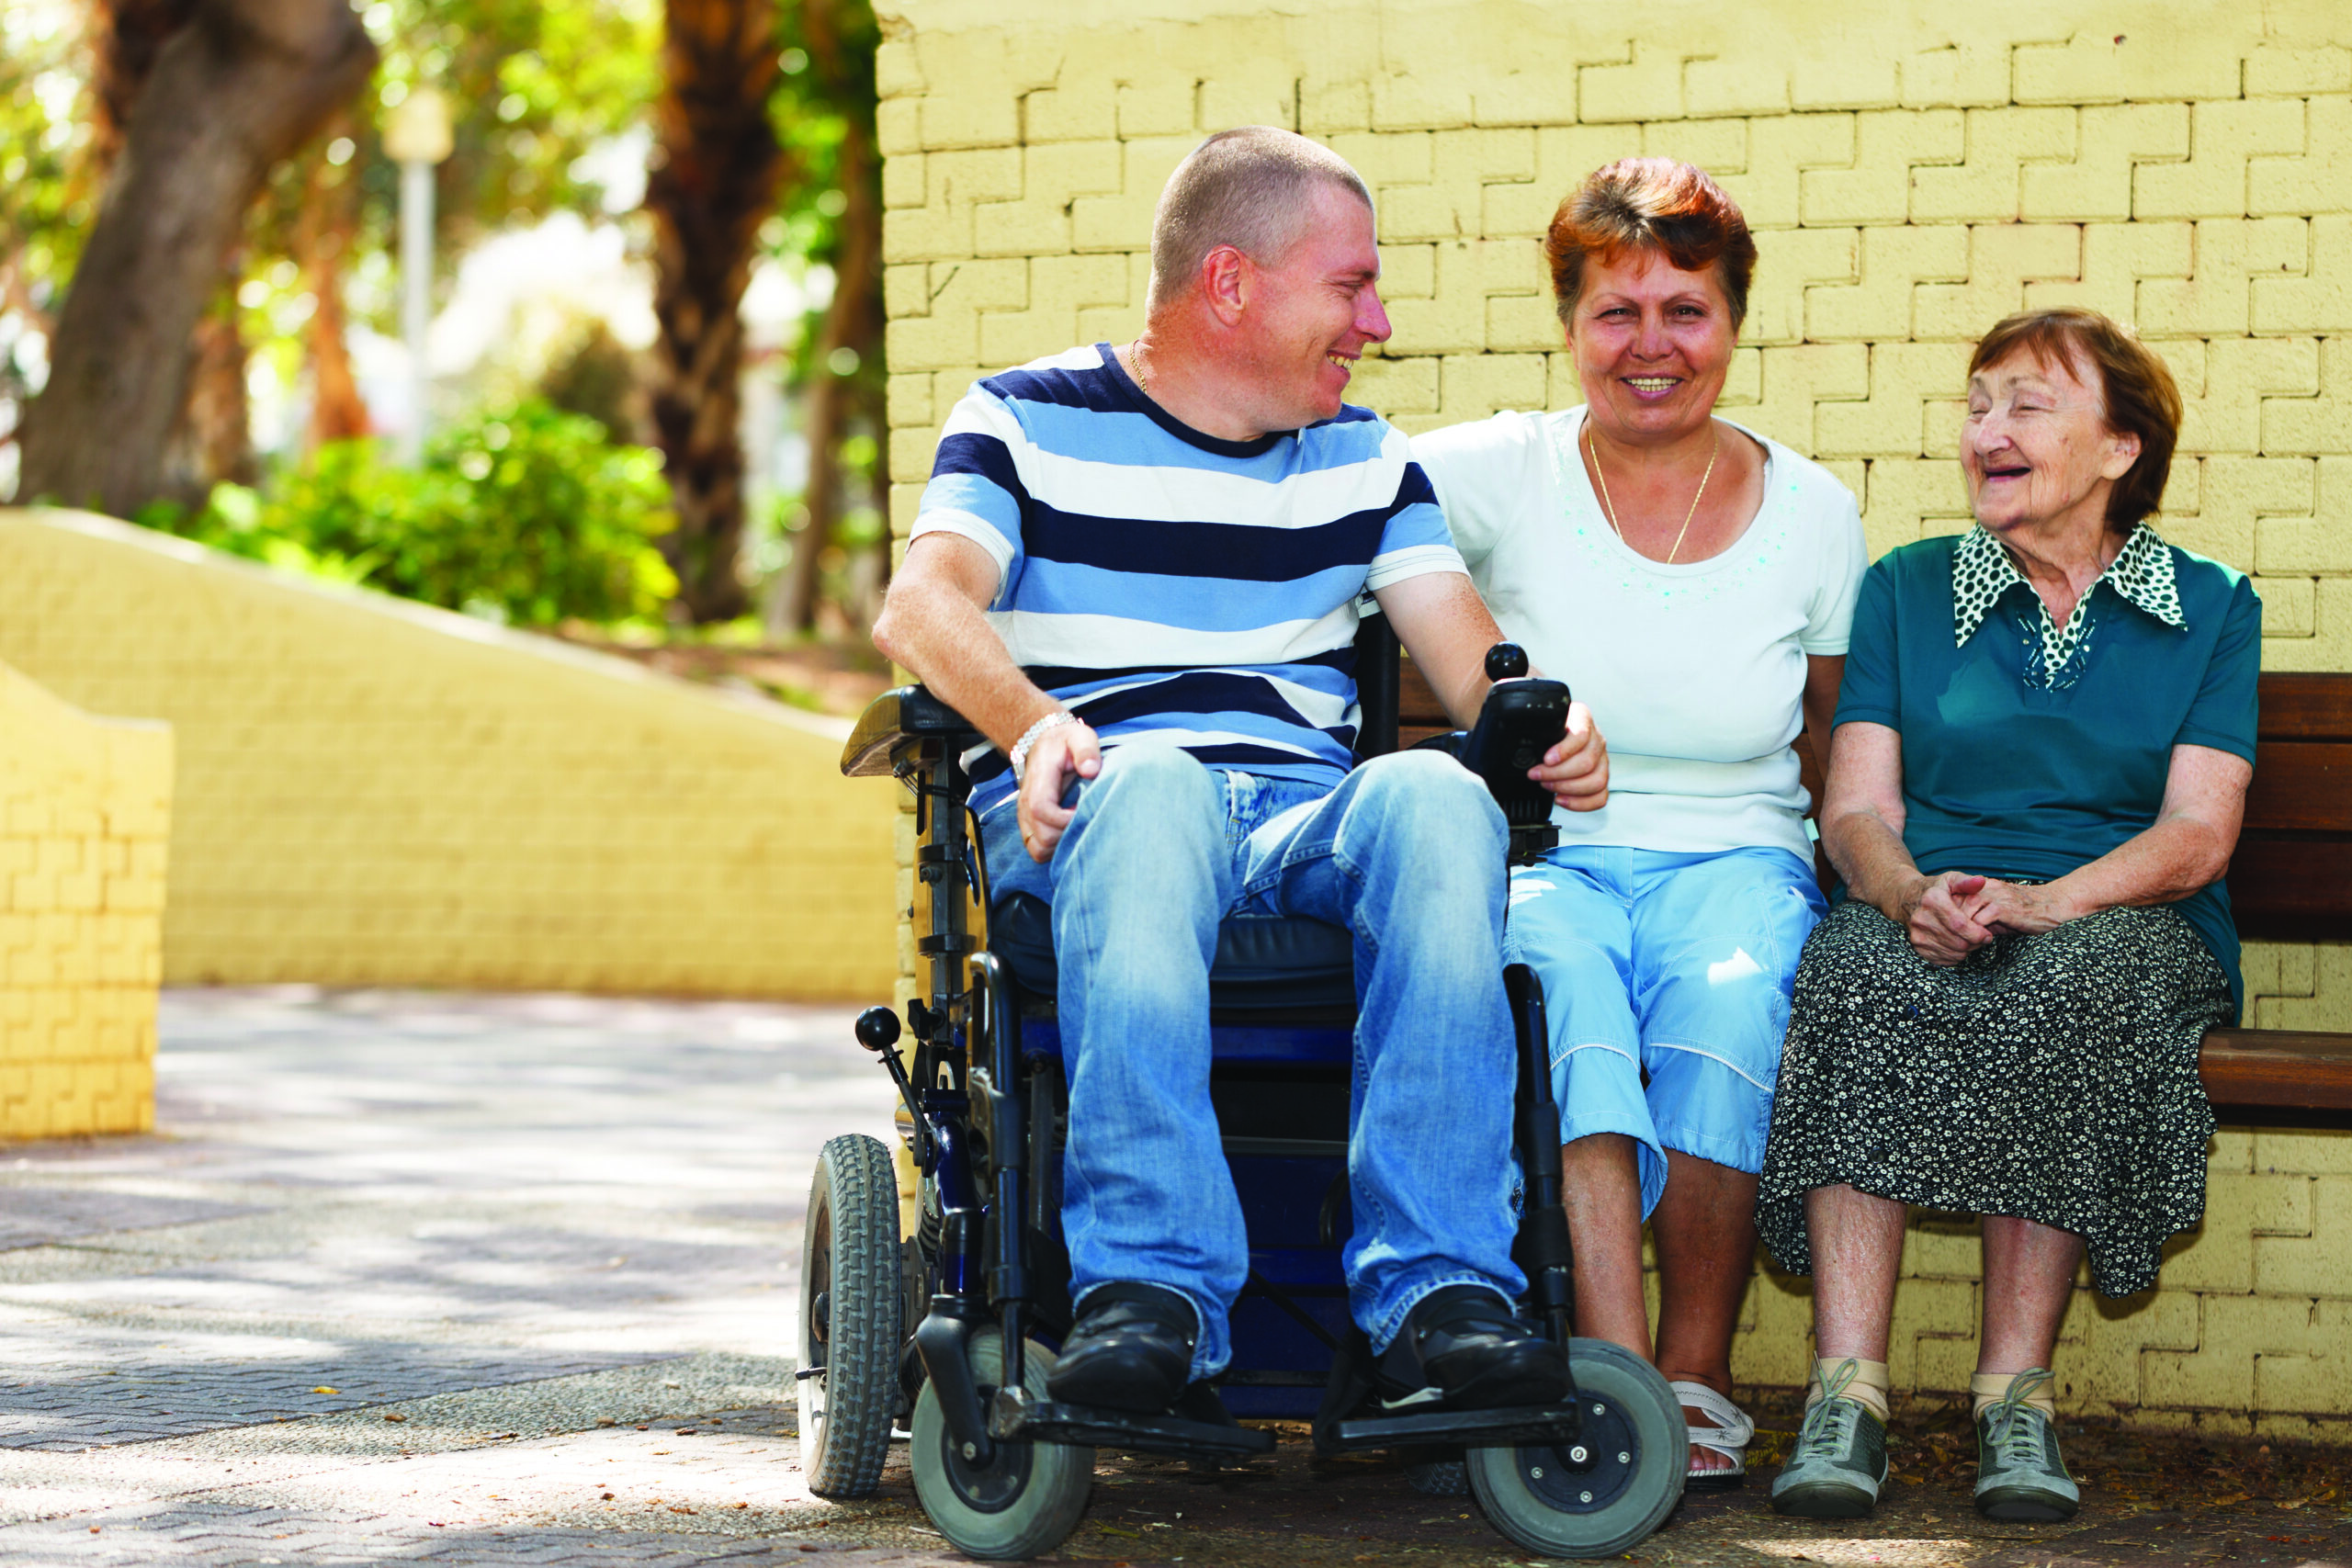 three people smiling at each other. one is sitting in a wheelchair and the other two are seated on a bench